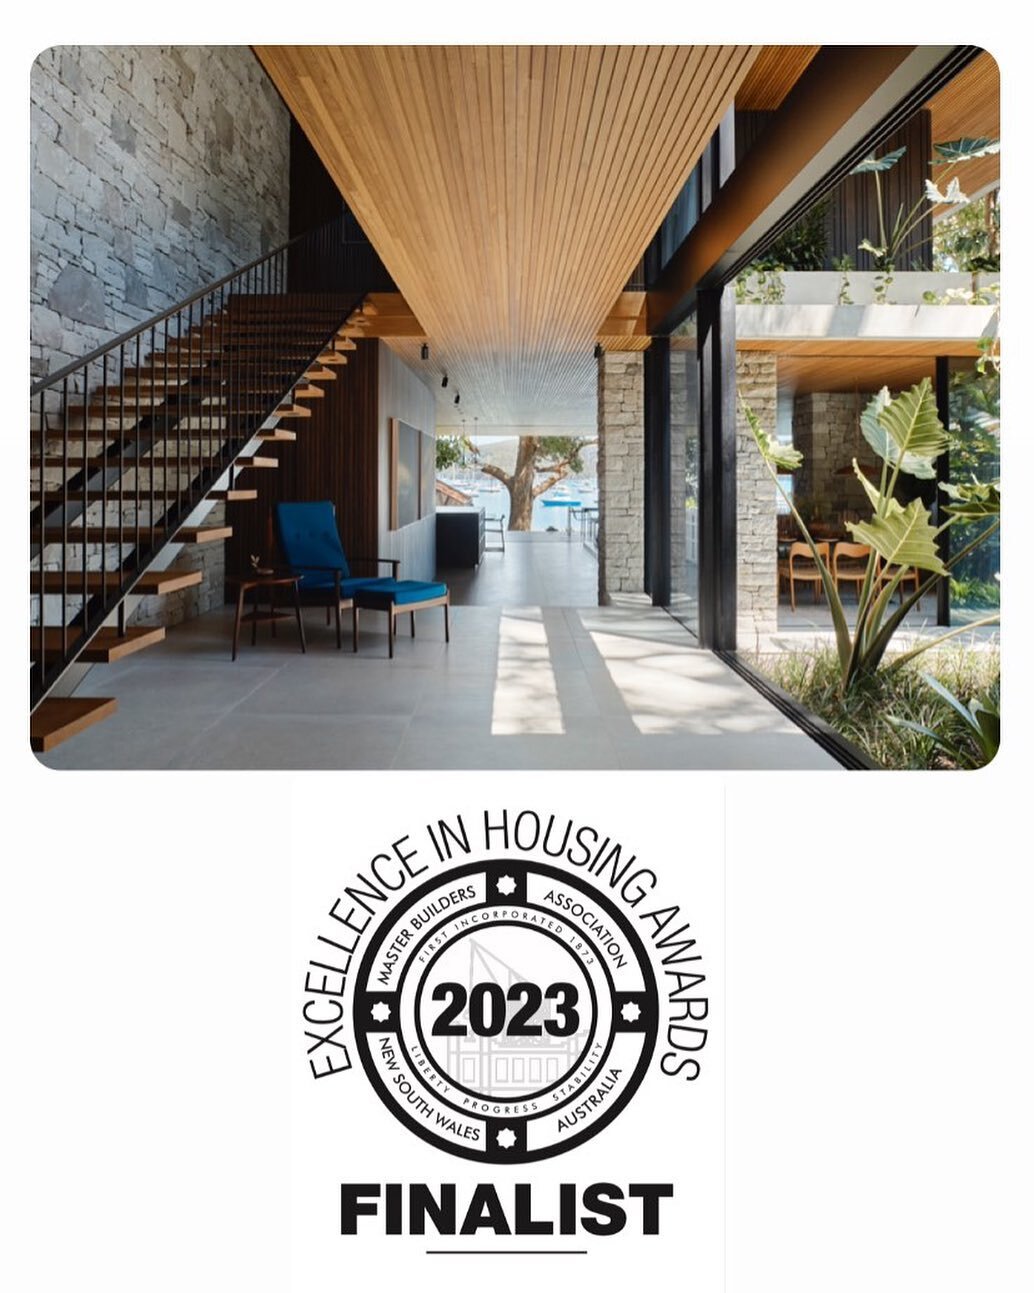 Honoured to be a finalist in the Master Builders Excellence in Housing Awards for 2023 🙌🏽